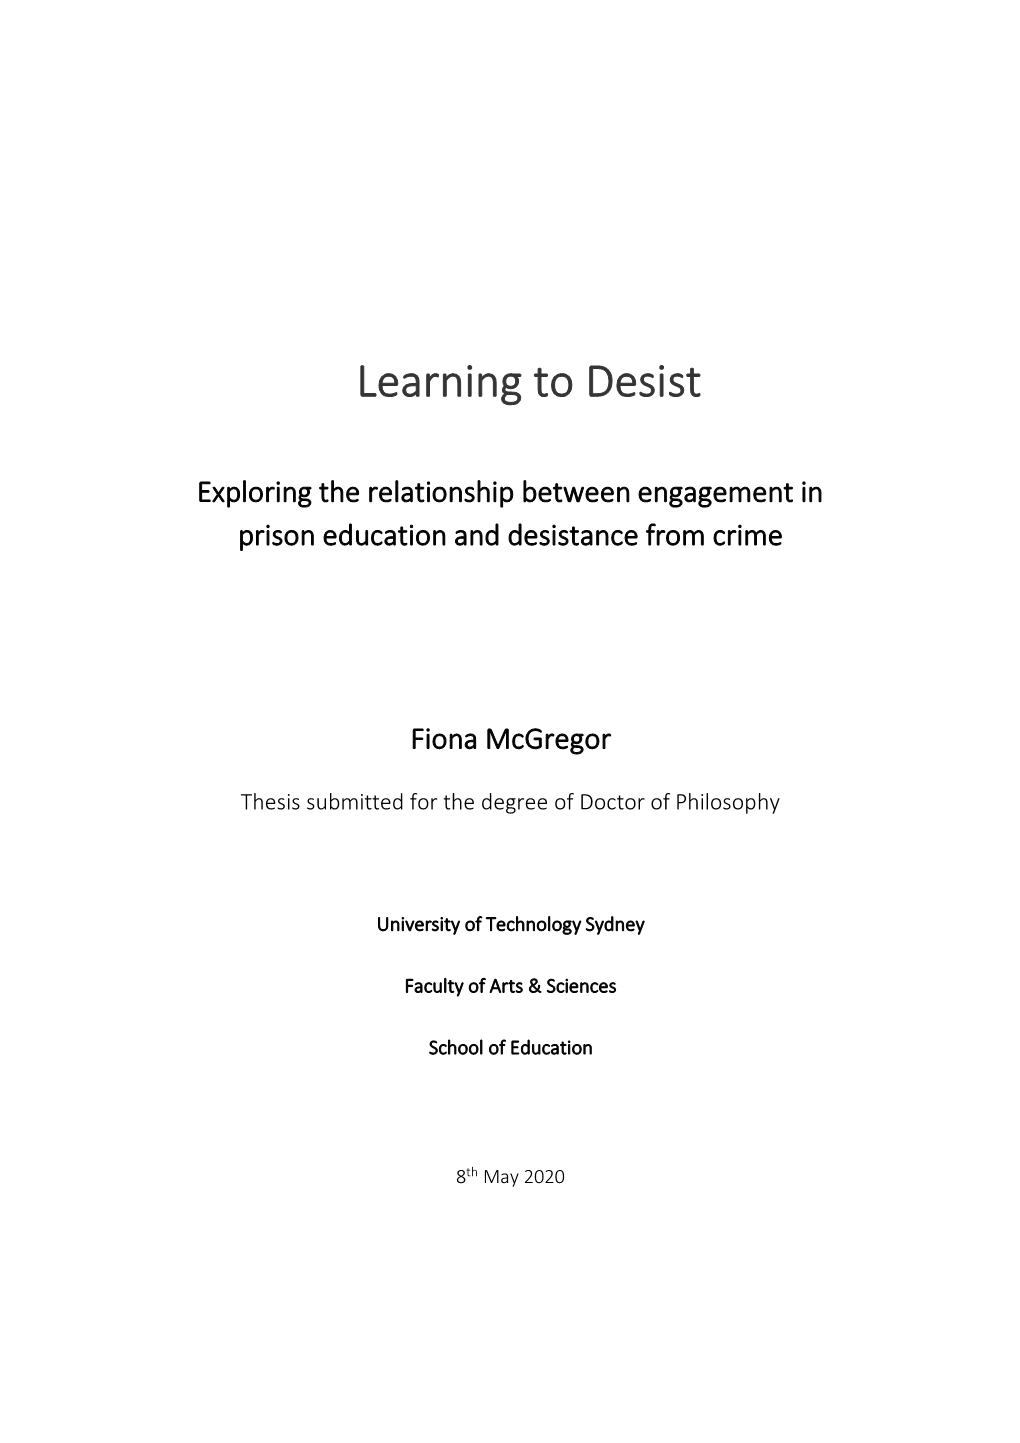 Exploring the Relationship Between Engagement in Prison Education and Desistance from Crime